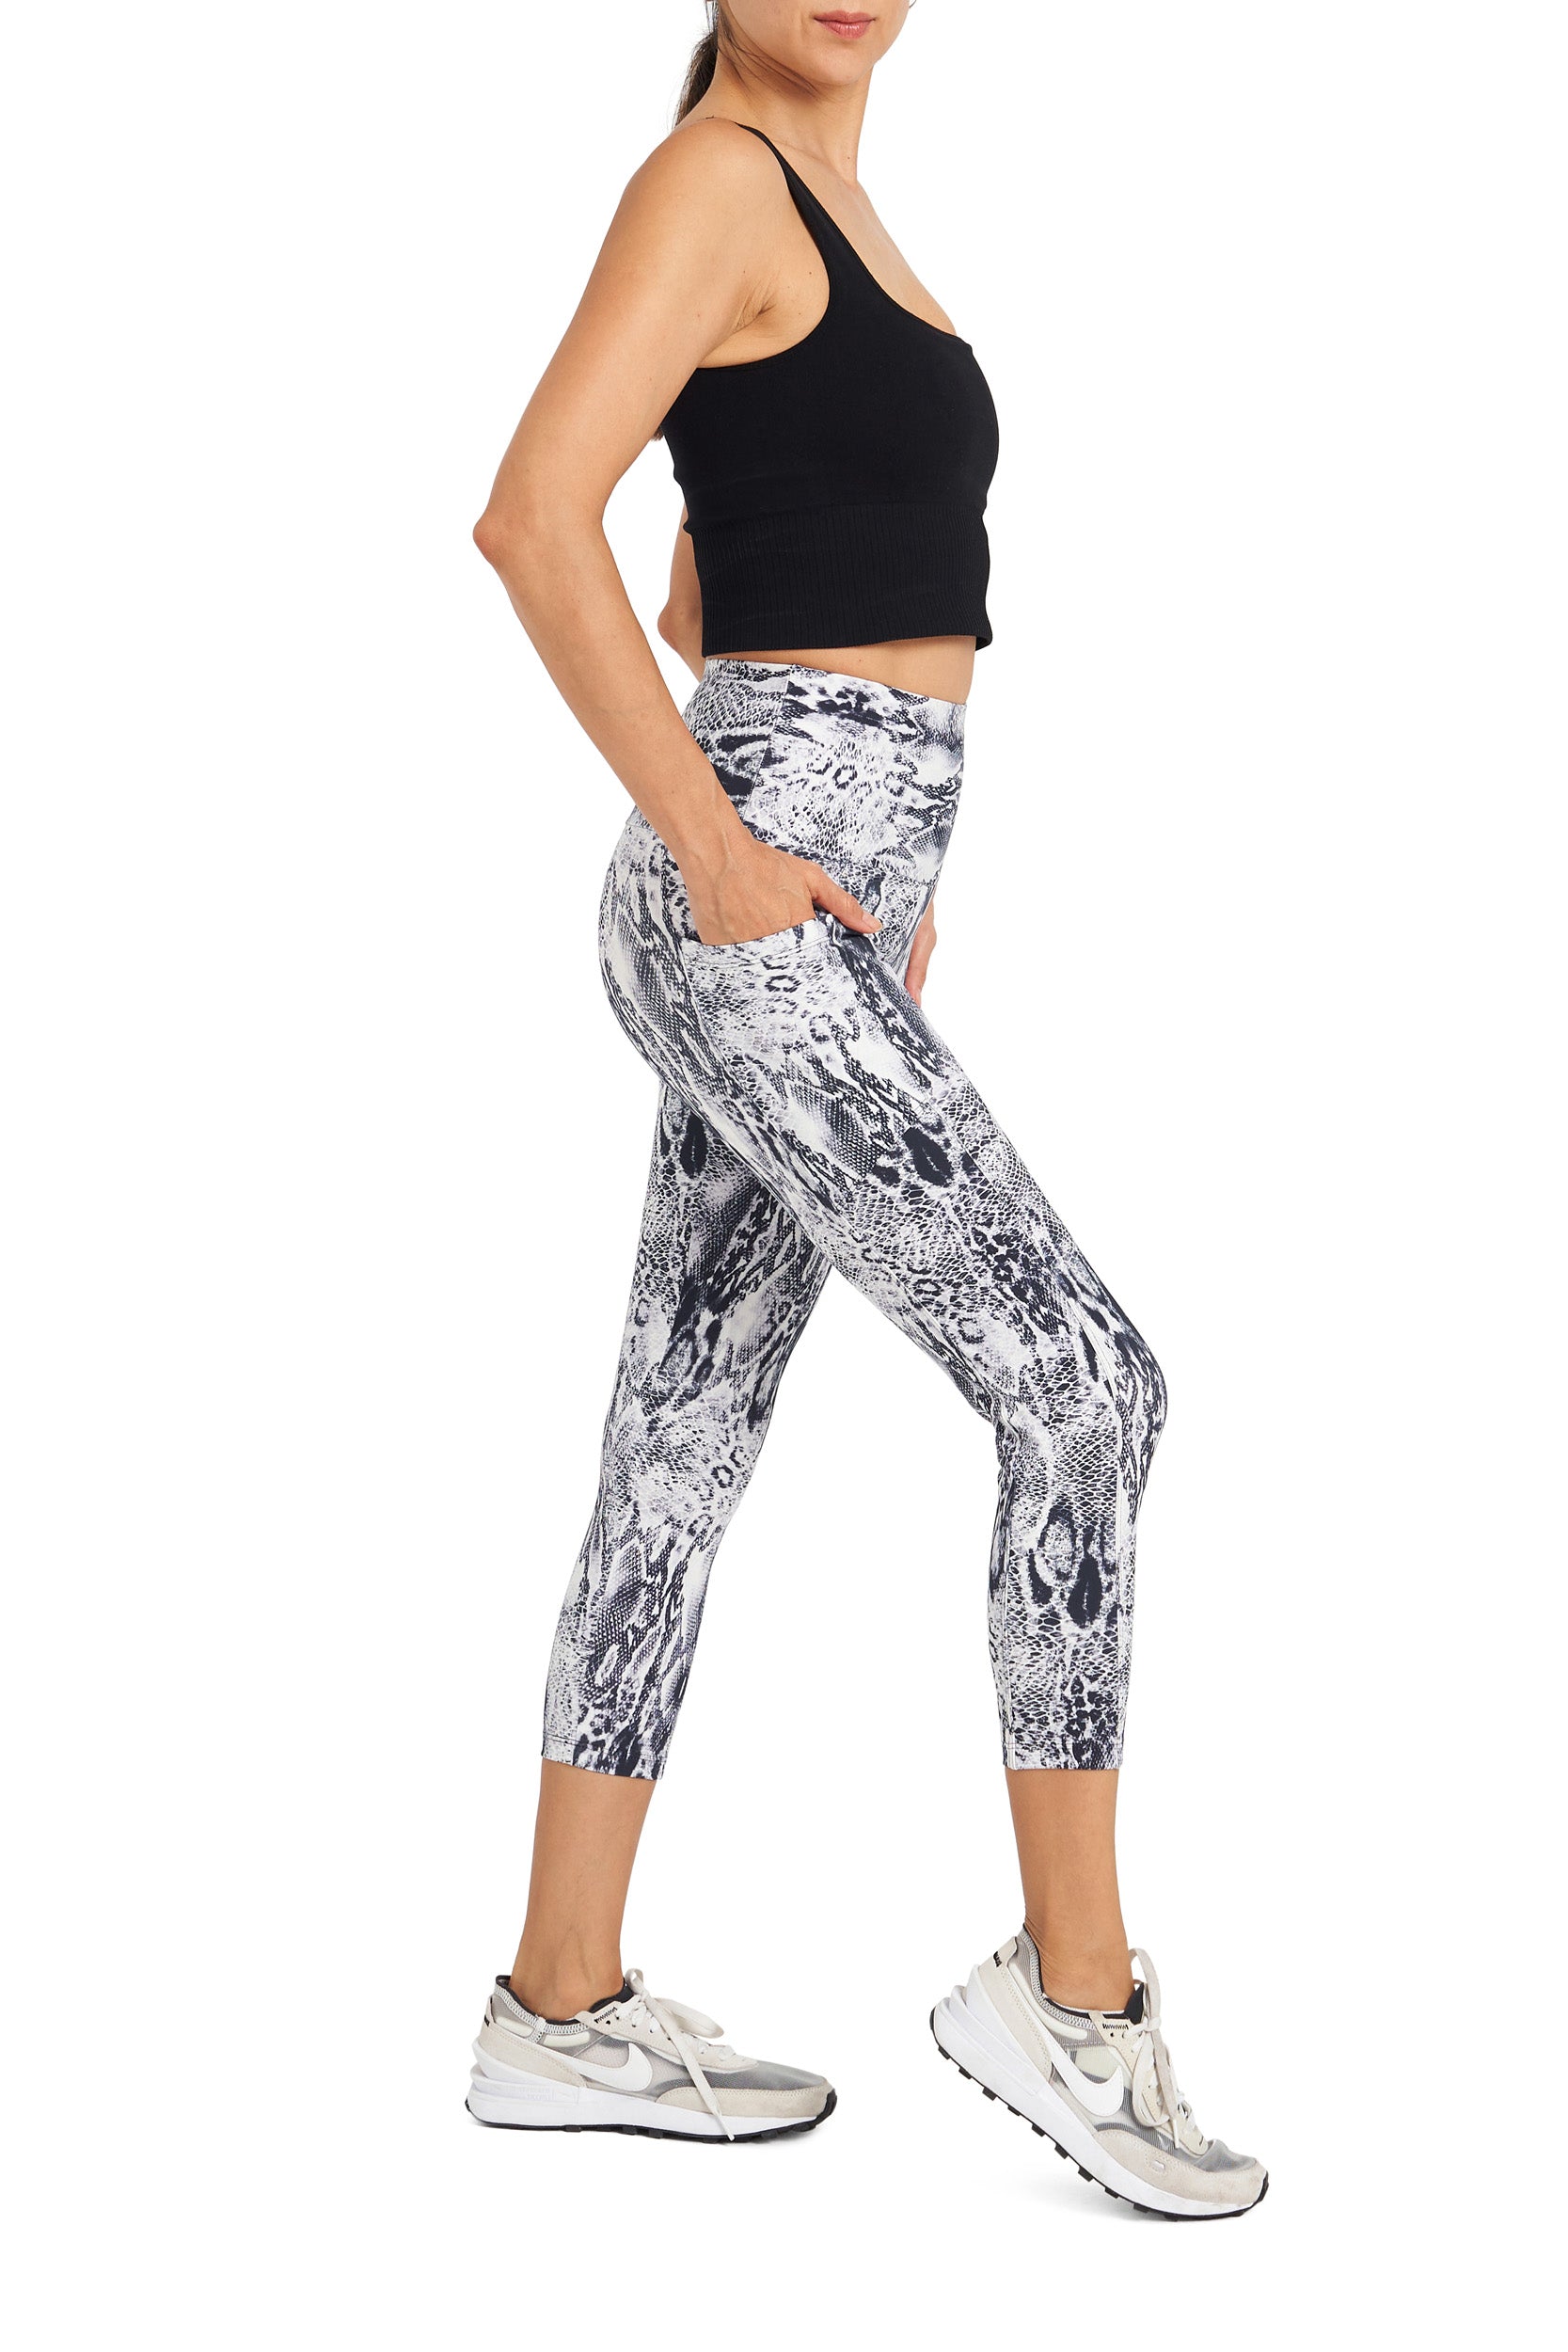 vendor-unknown Mid Calf Length Legging Melissa High Waisted  Mid Calf Legging with Pockets